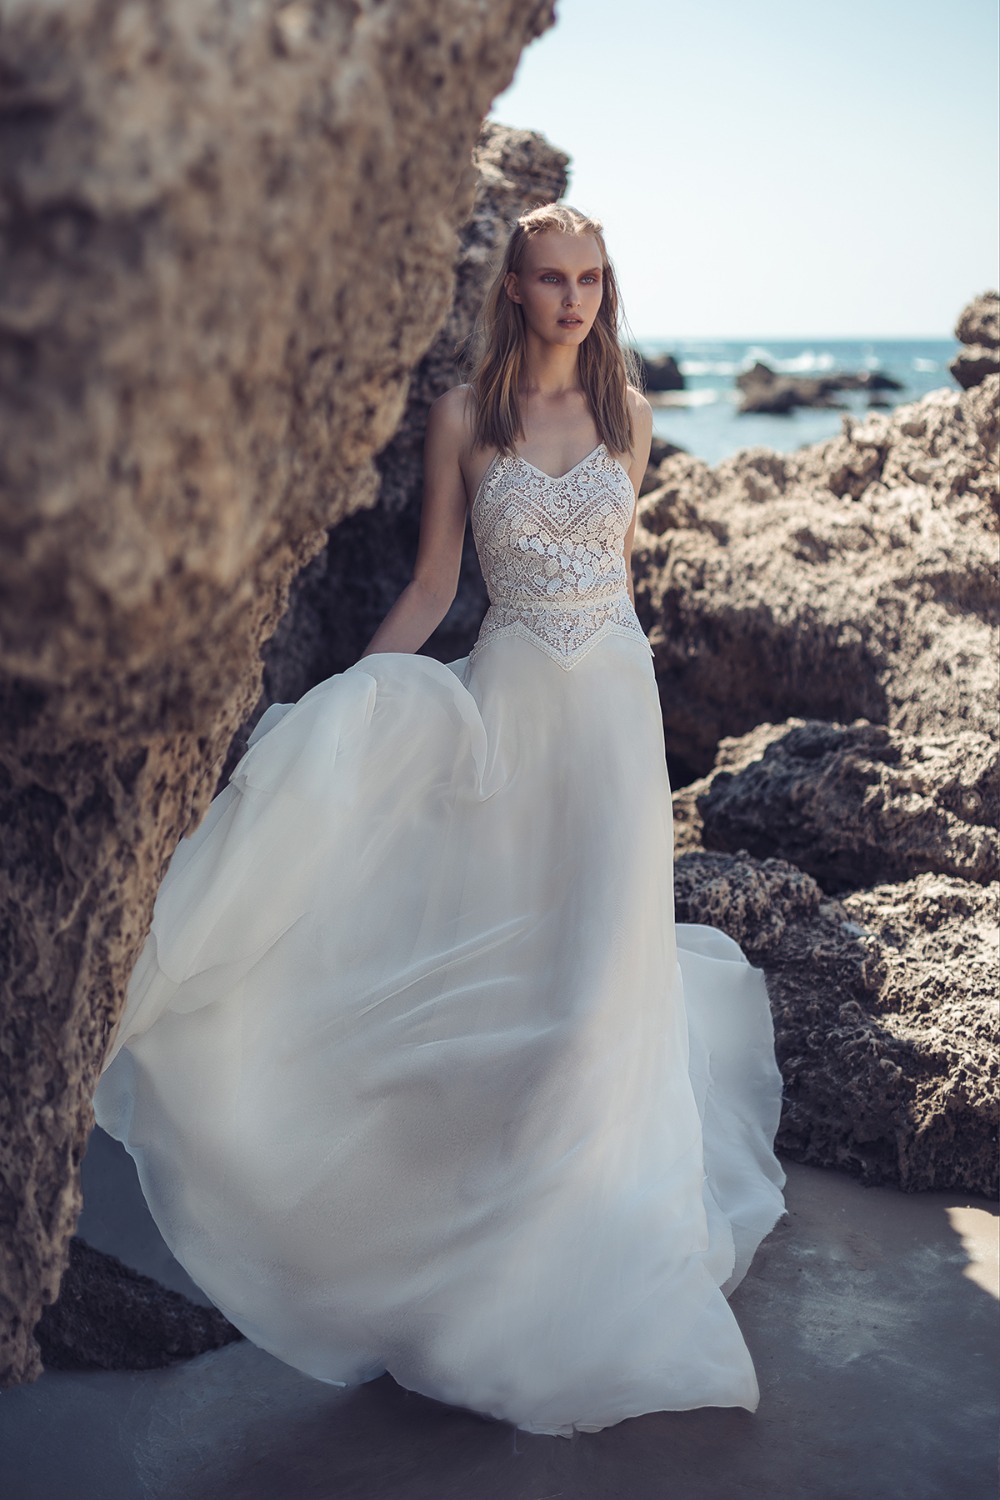 tulle skirt wedding dress with elegant top by Lilium